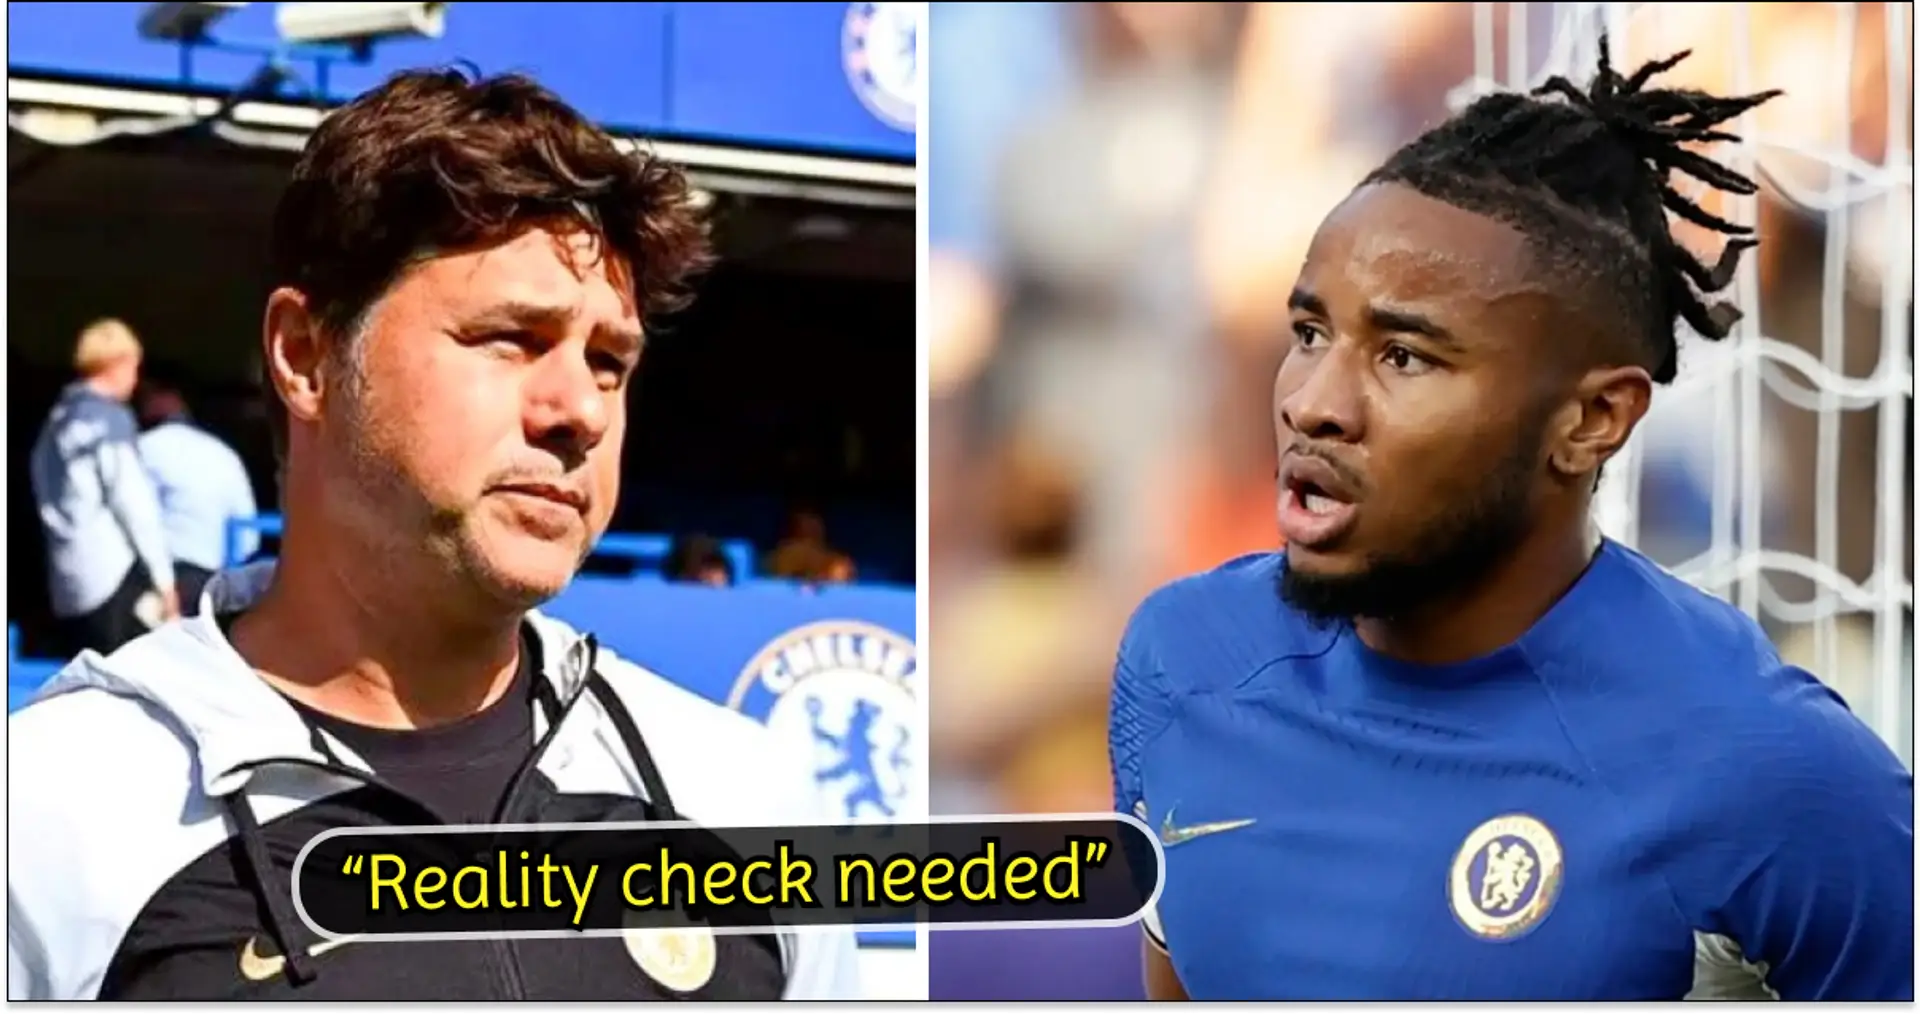 'Ain't hearing this excuse': Fan explains why Poch wrong to blame injuries for Chelsea woes